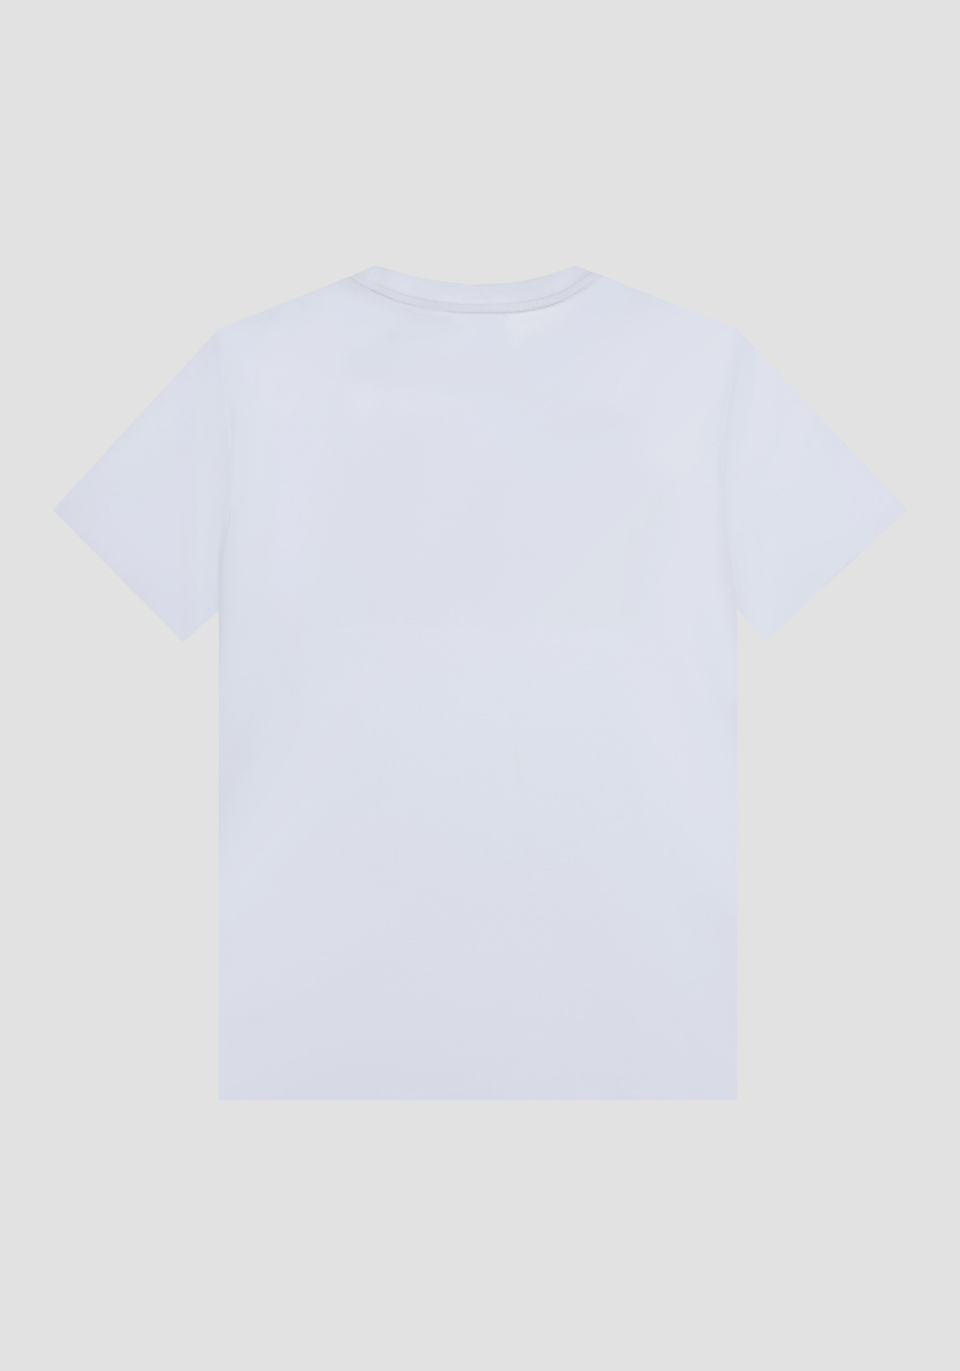 REGULAR FIT T-SHIRT IN PURE COTTON WITH RUBBERISED LOGO PRINT - Antony Morato Online Shop